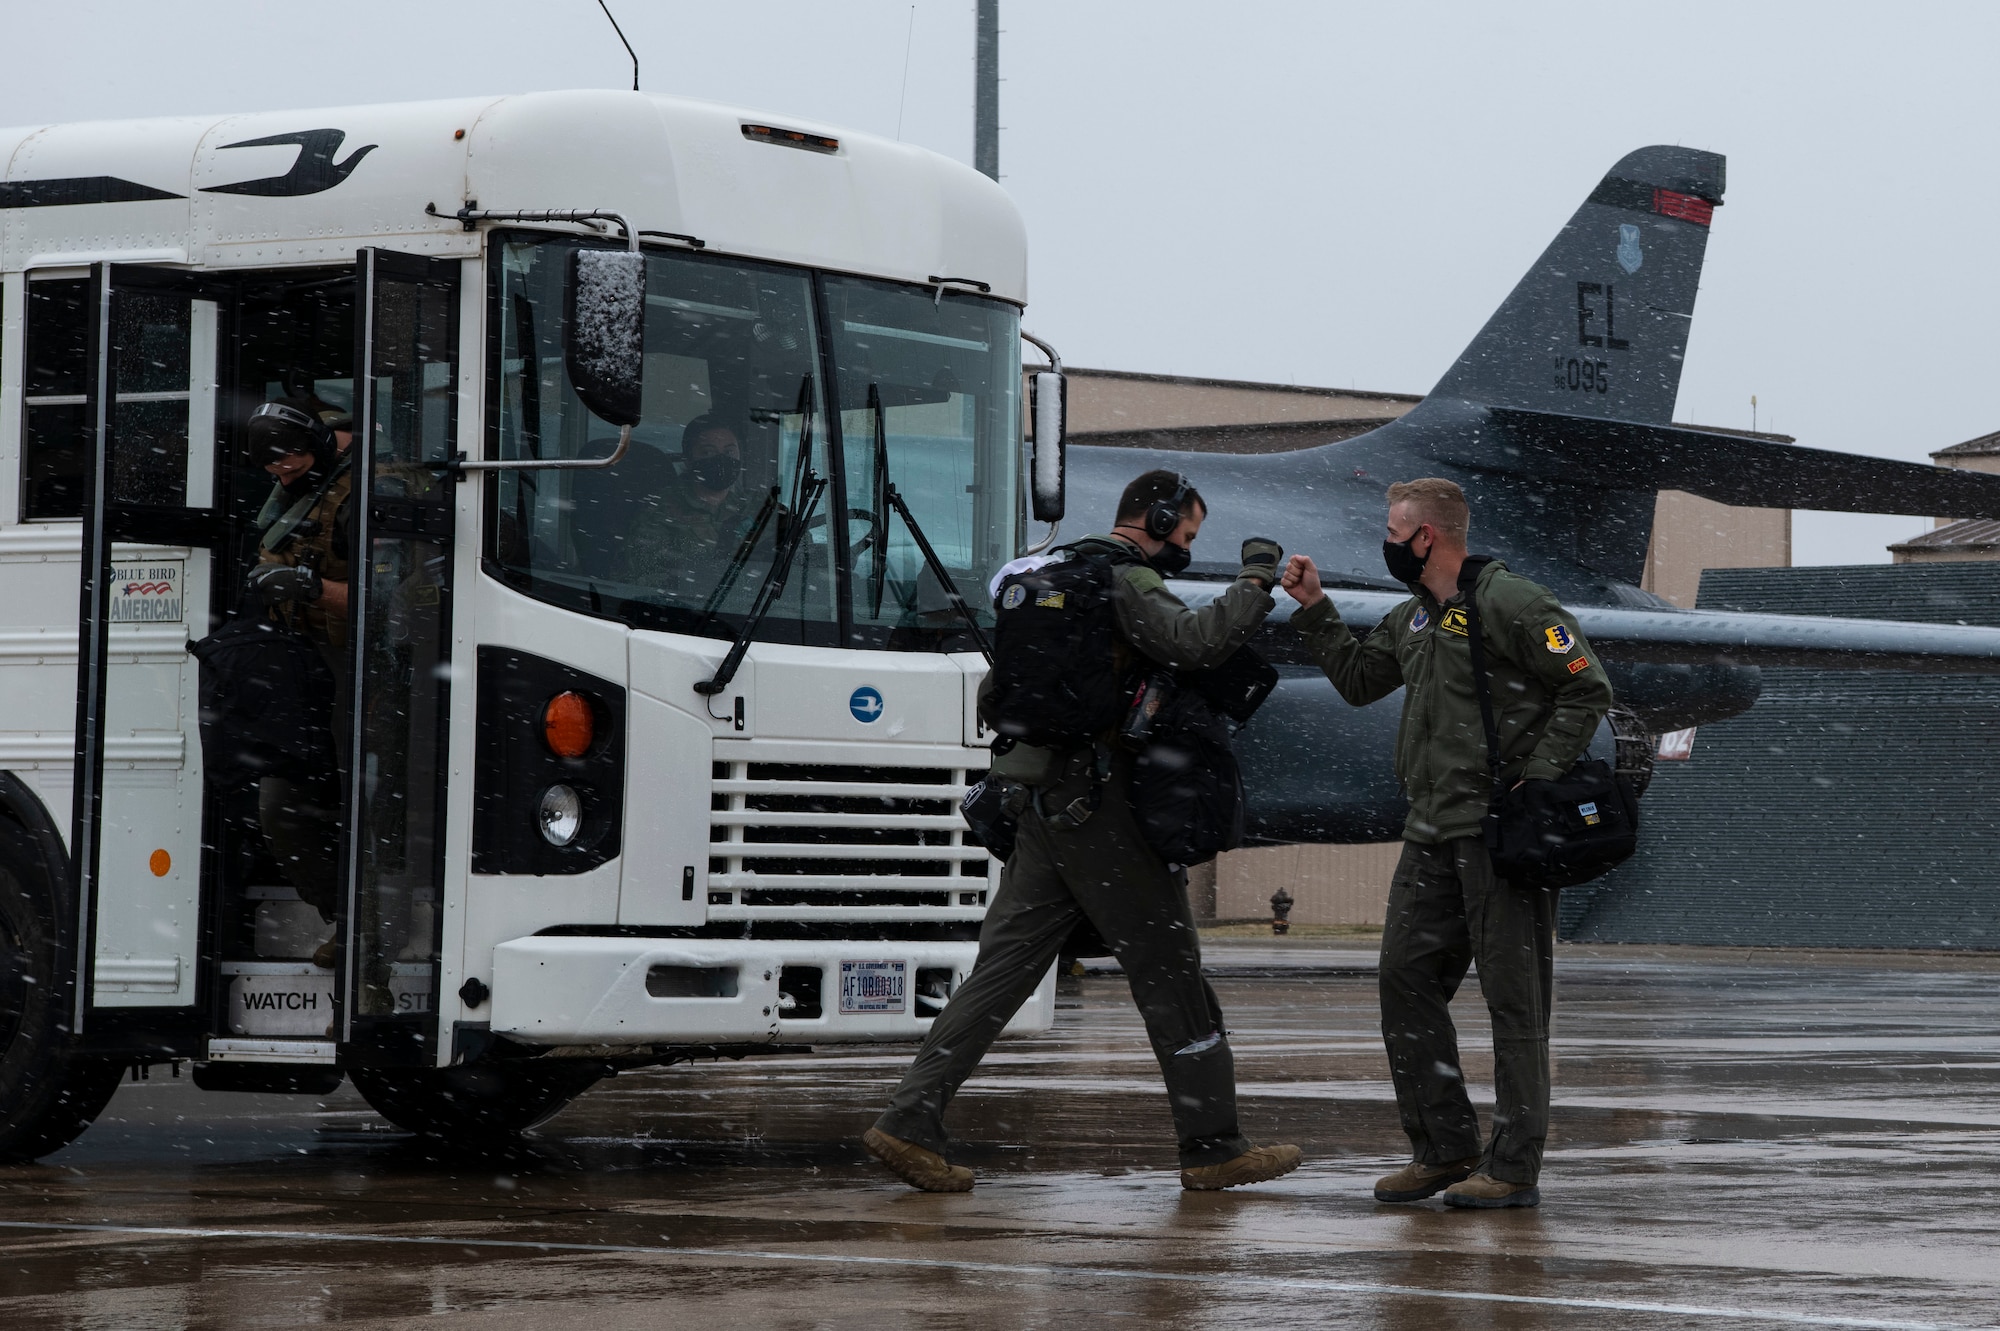 Aviators from the 37th Bomb Squadron greet each other before the start of a Bomber Task Force mission at Ellsworth Air Force Base, S.D., April 6, 2021.